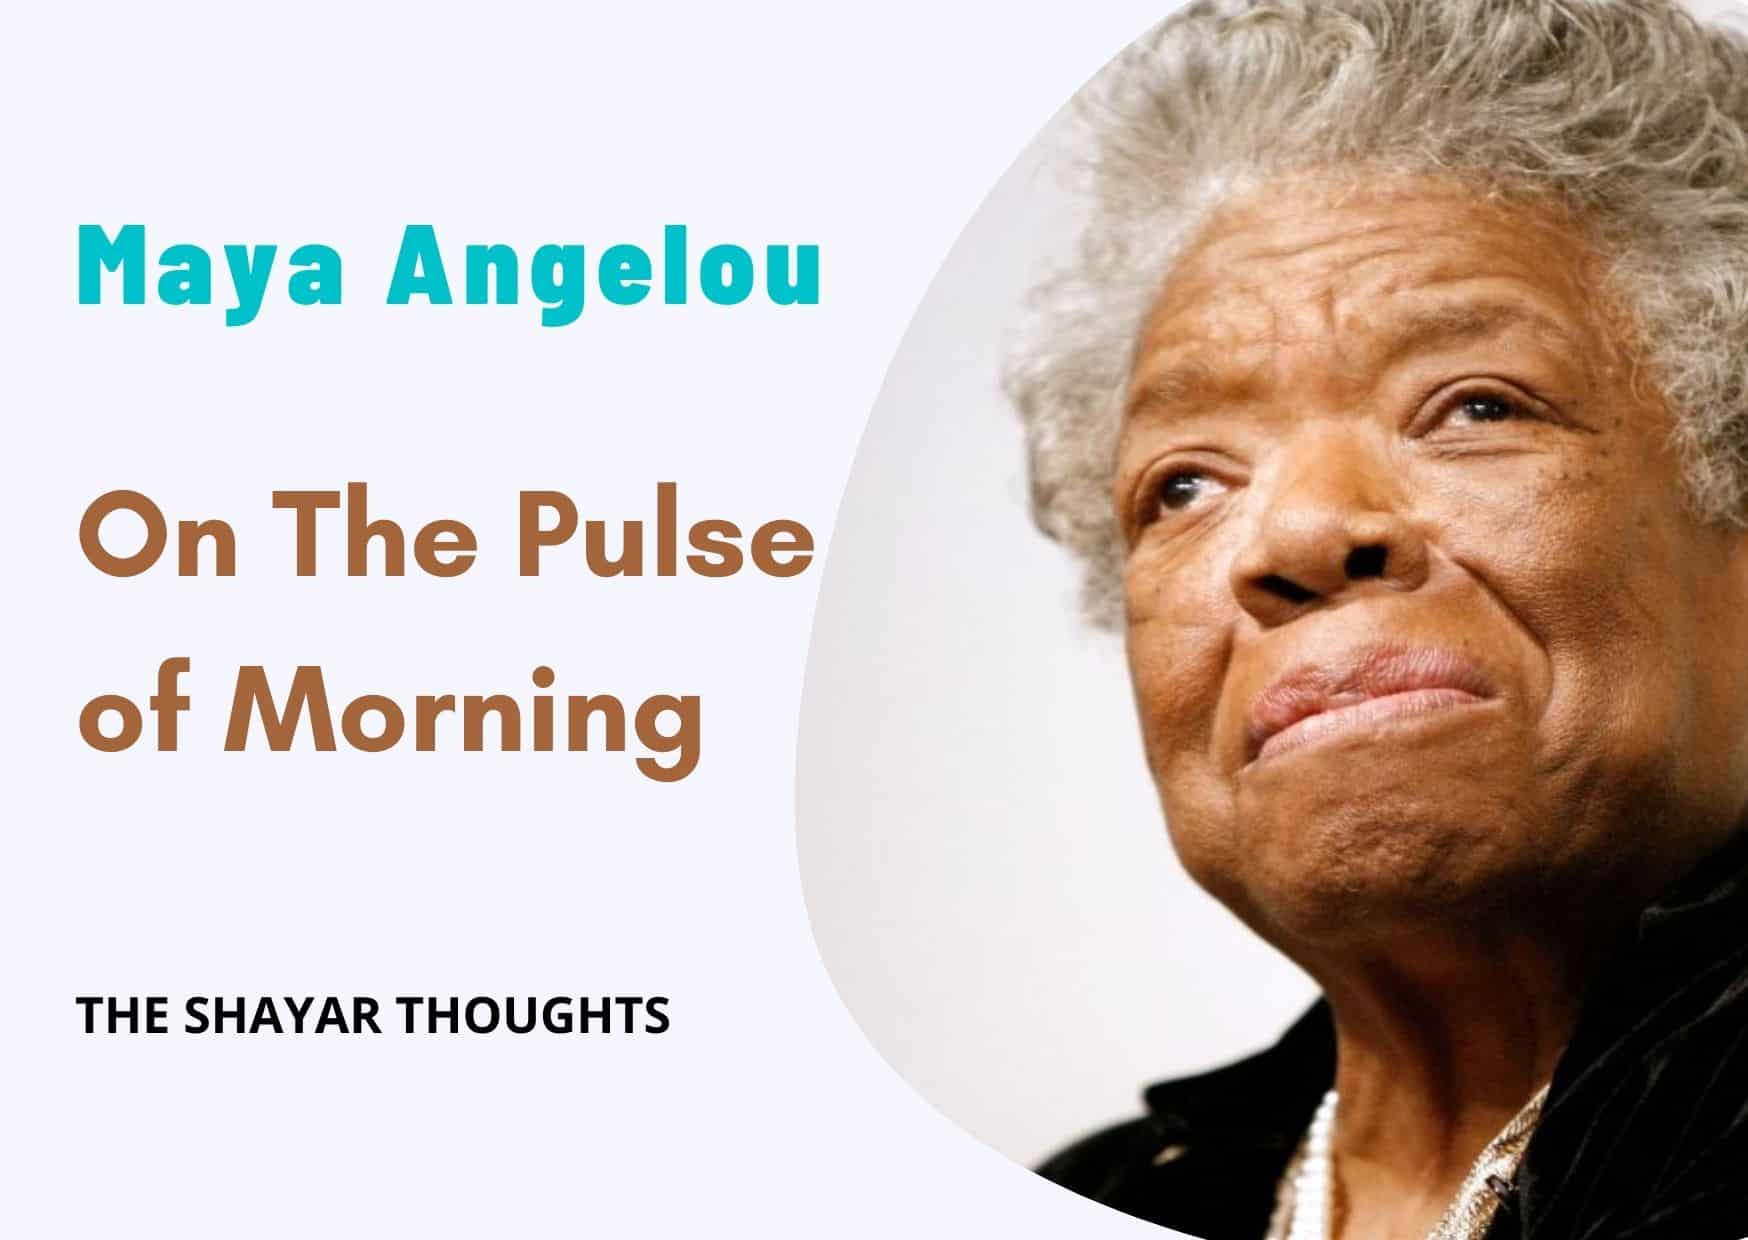 On The Pulse of Morning Poem By Maya Angelou, Maya Angelou Famous Poetry